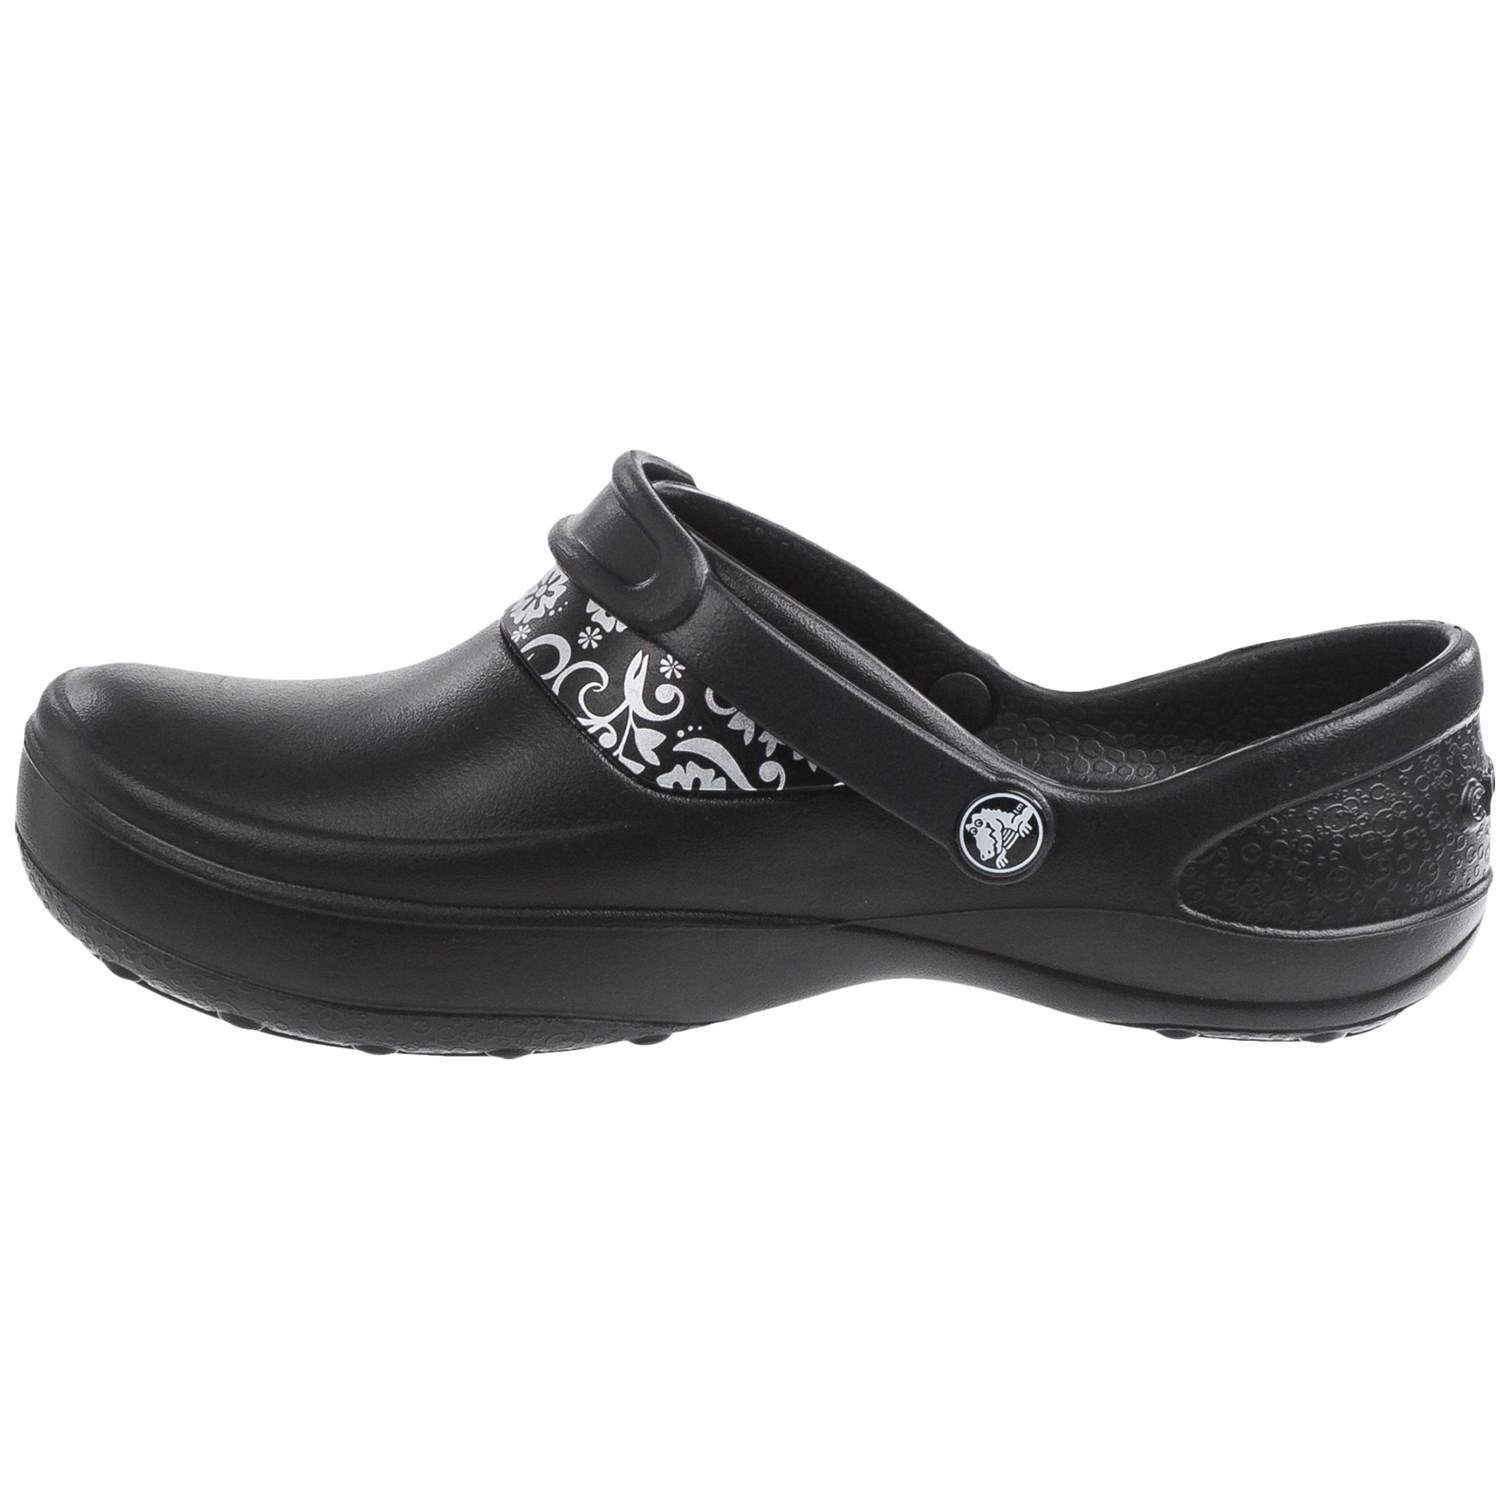 Crocs Mercy Work Shoes (For Women) - Save 55%